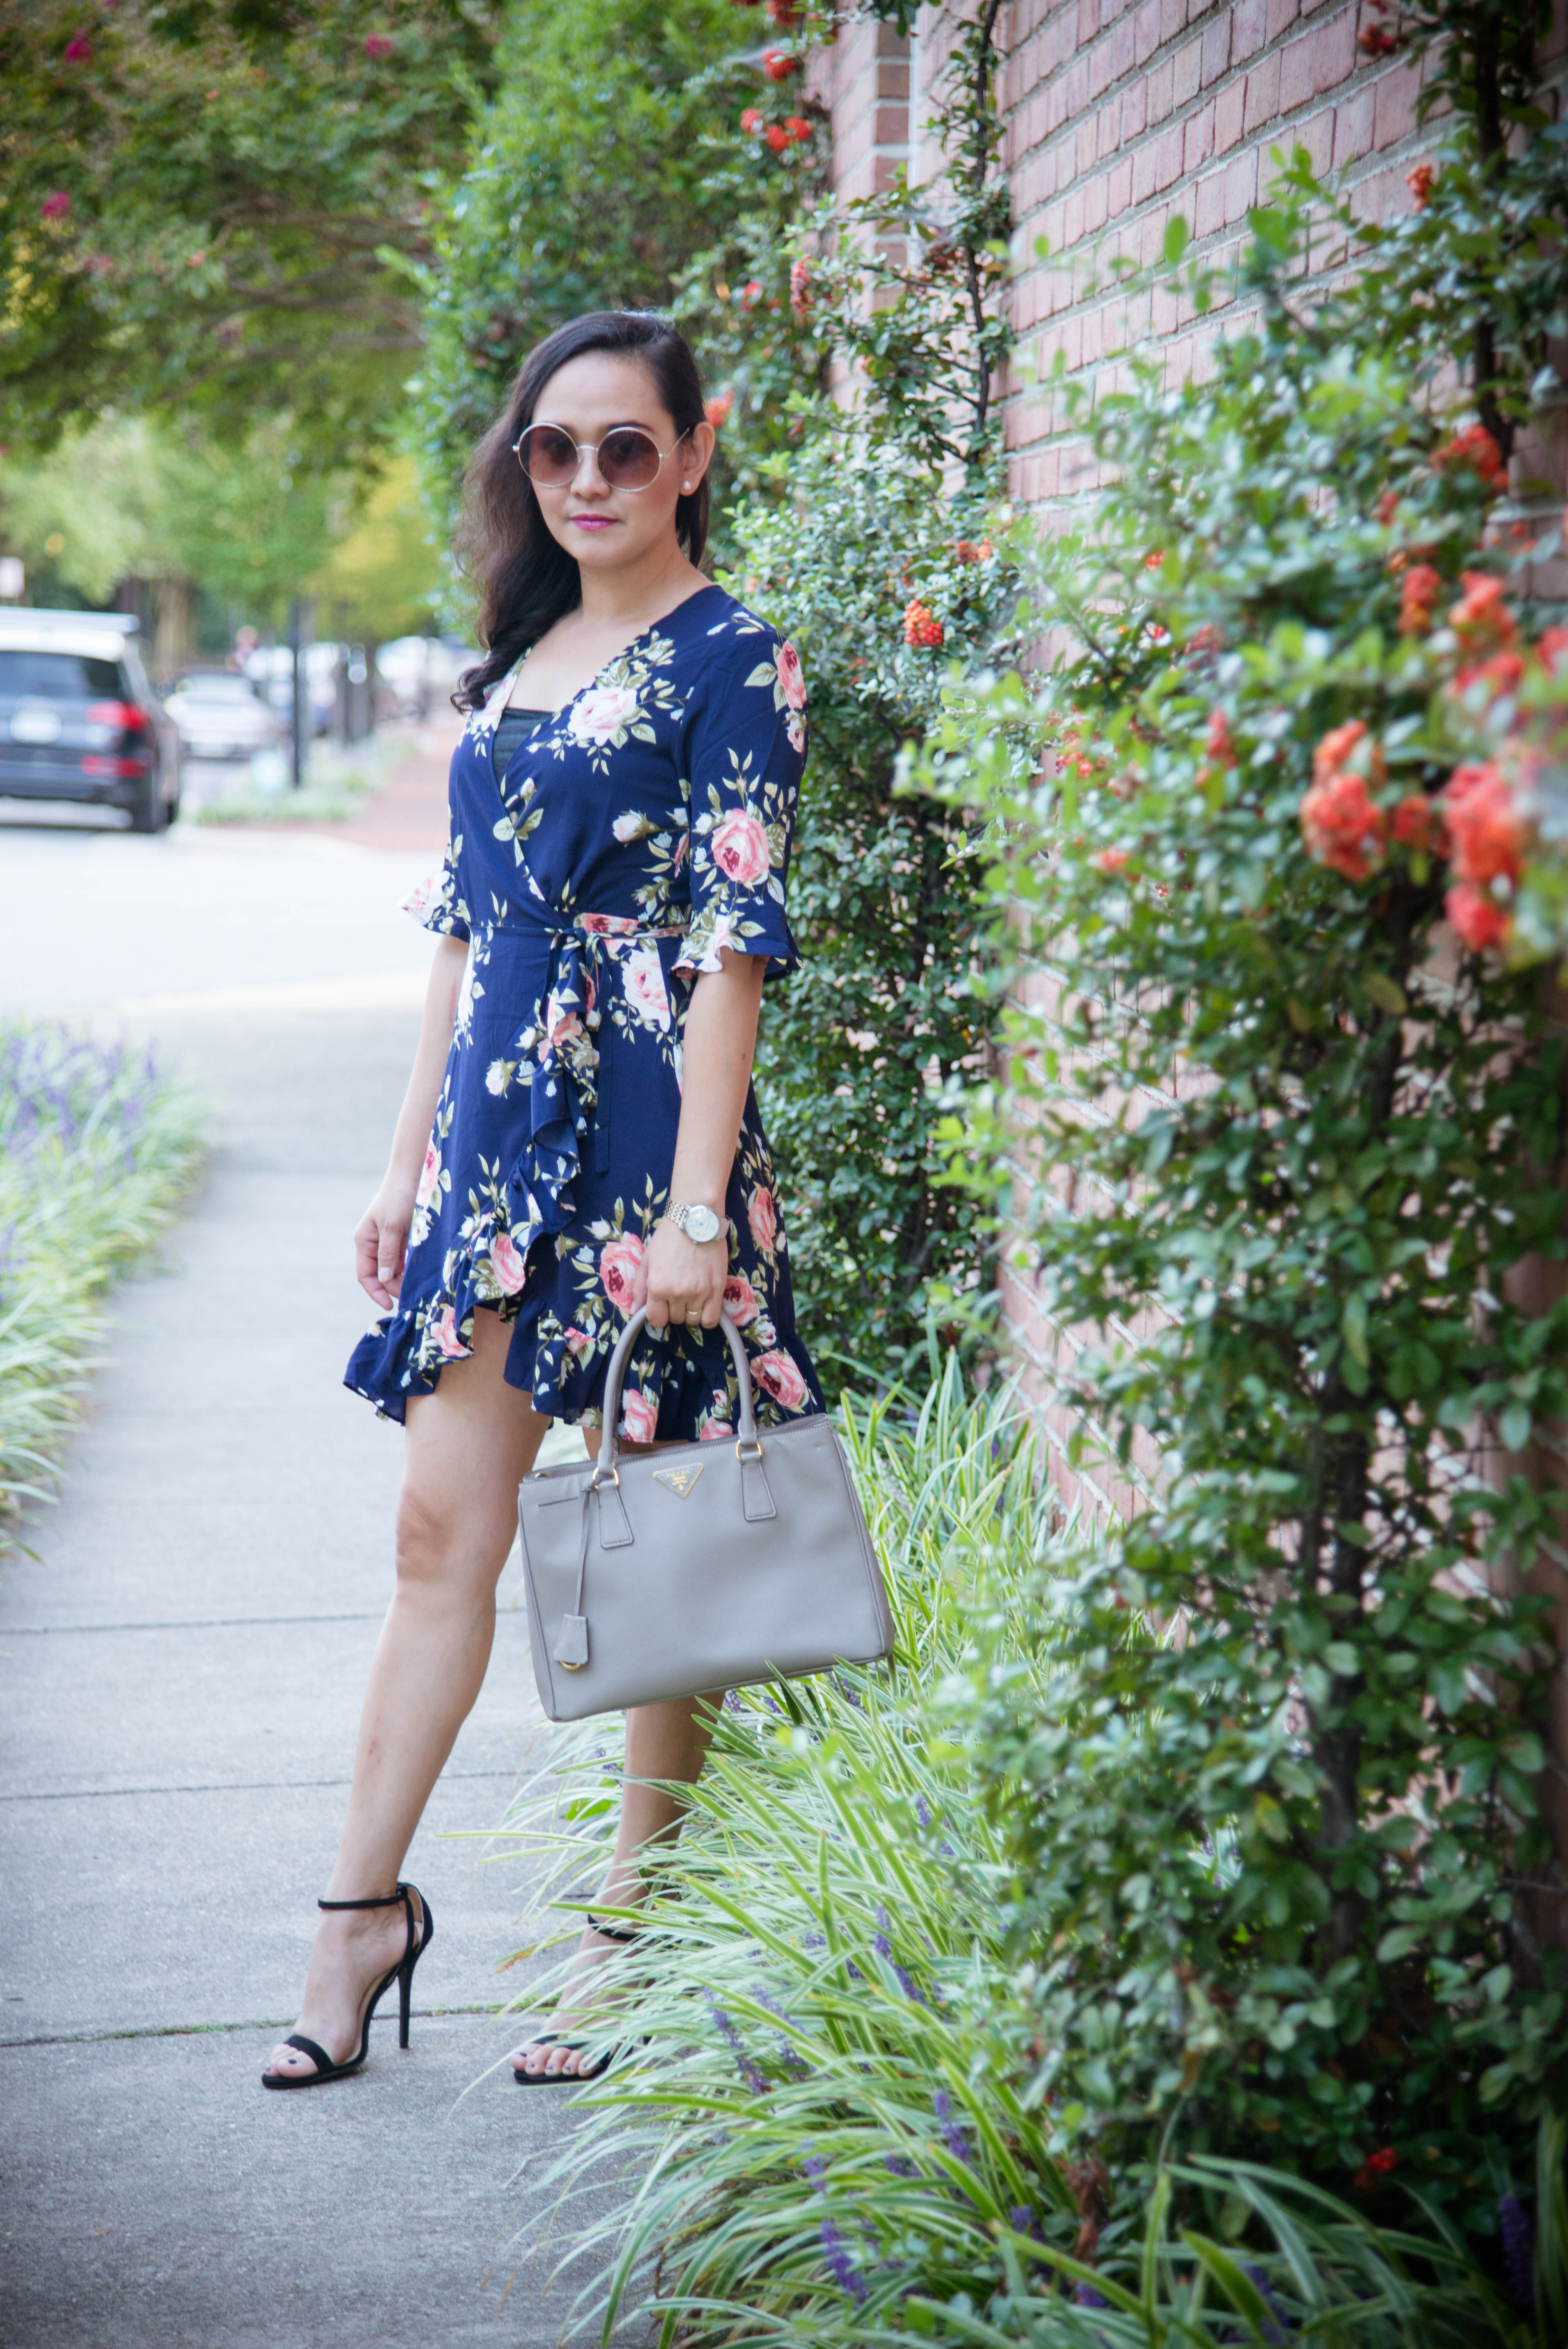 Transitioning To Fall with Floral Frill Hem Wrap Dress - SimplyChristianne